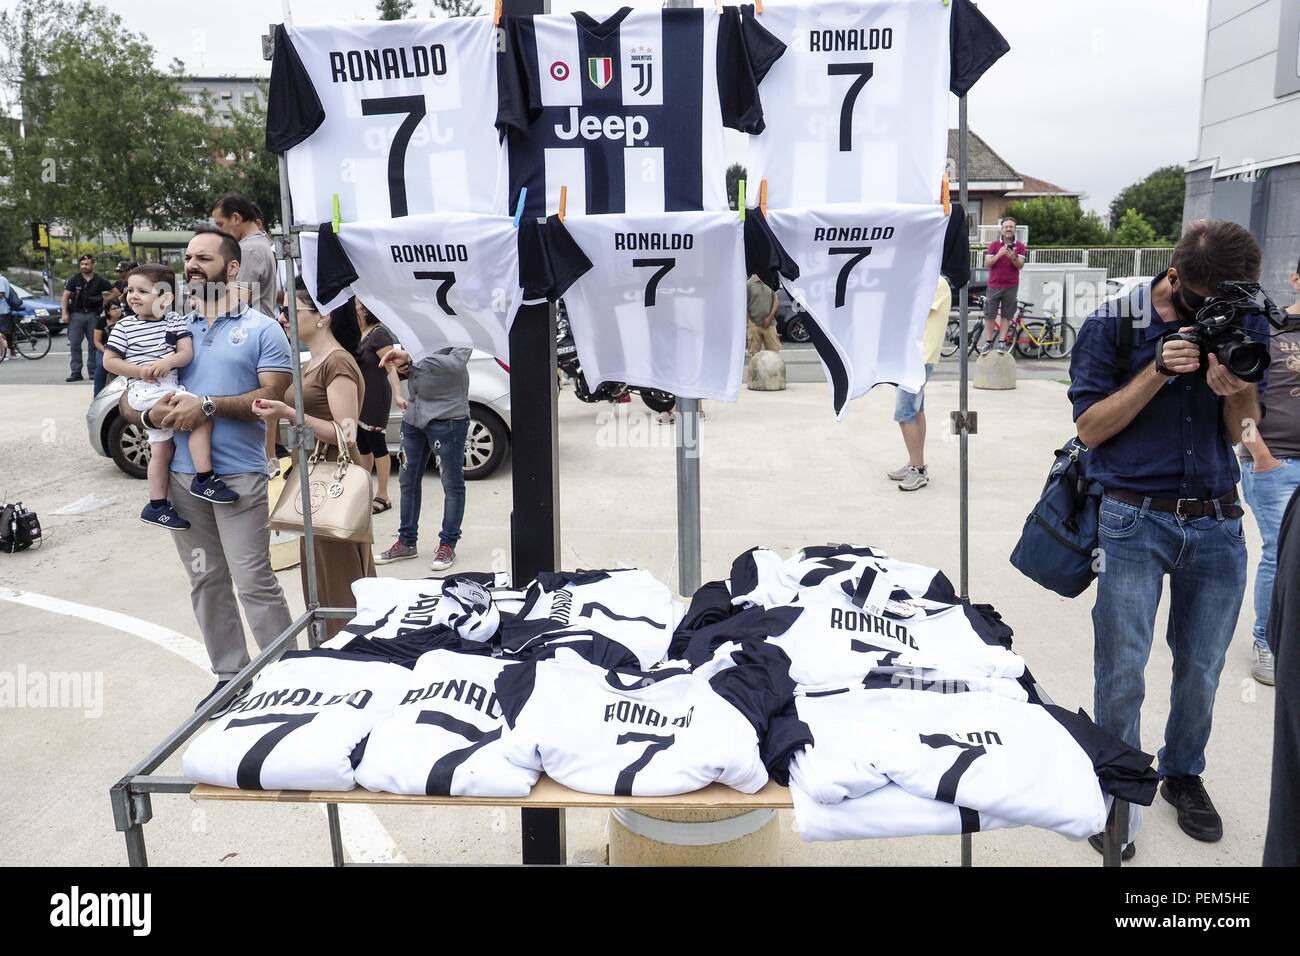 Juventus fans at the Allianz Stadium in Turin, Italy, await the arrival of Cristiano  Ronaldo ahead of his official unveiling as a Juventus player following his  €100 million transfer from Real Madrid.